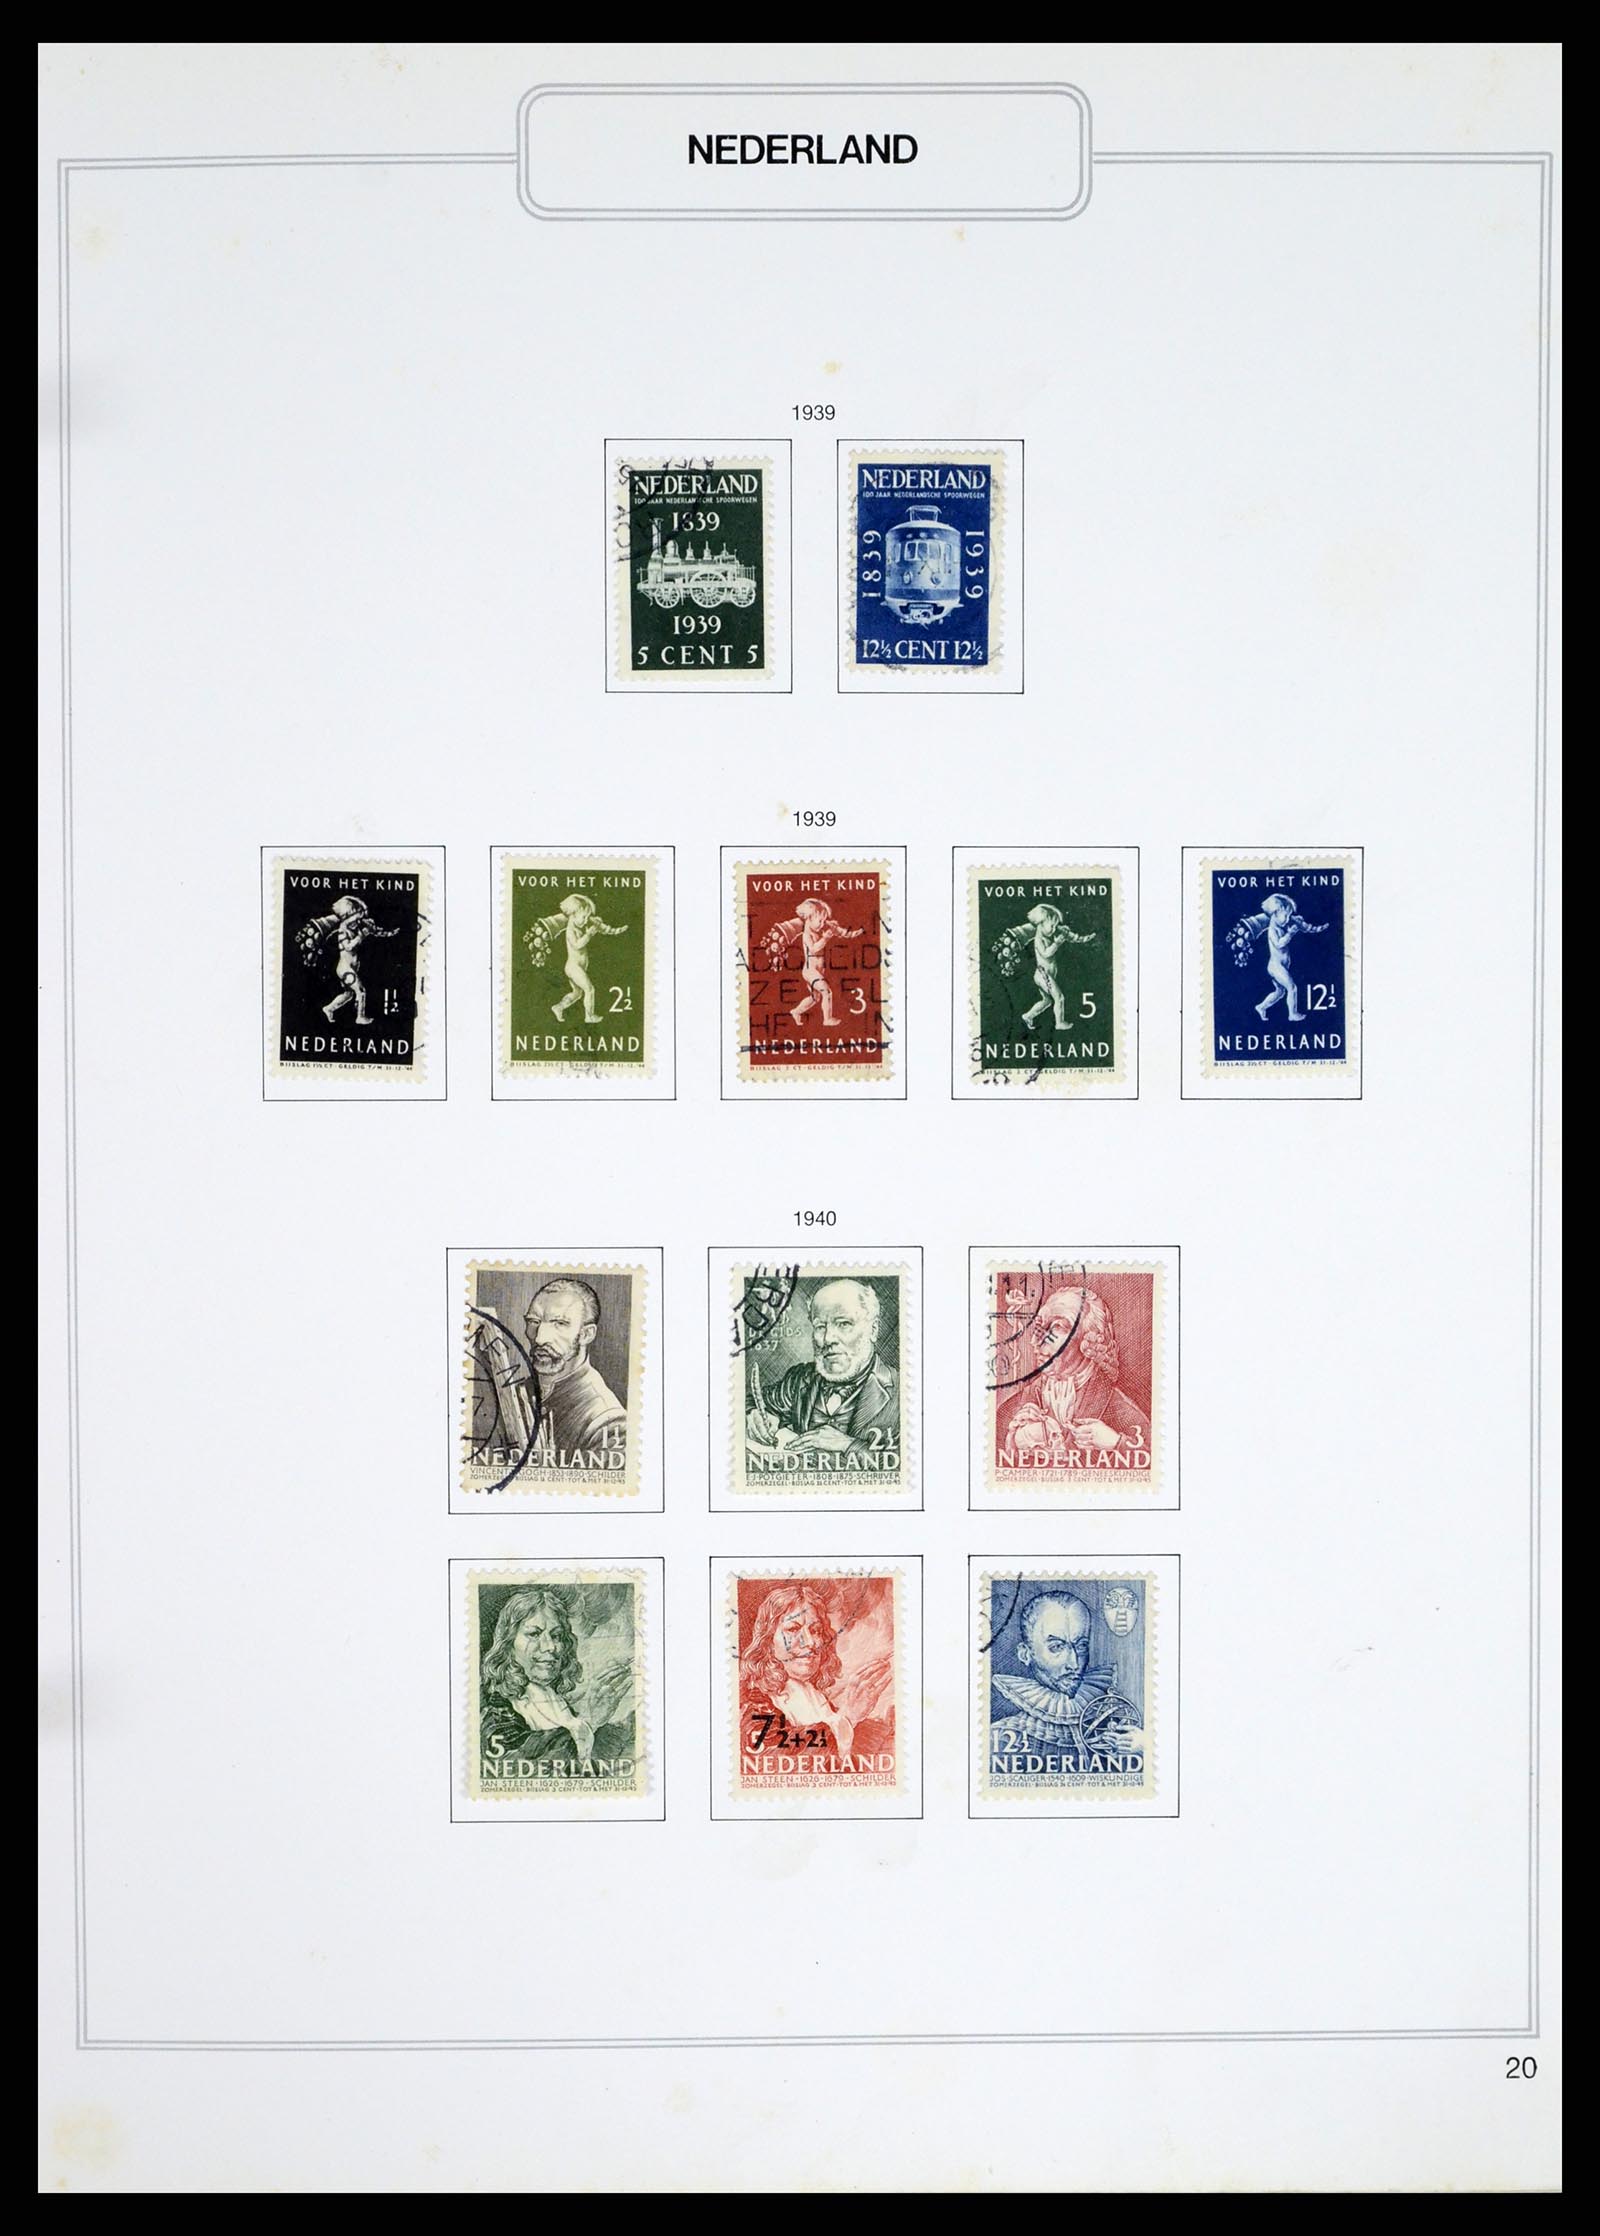 37348 020 - Stamp collection 37348 Netherlands 1852-1995.